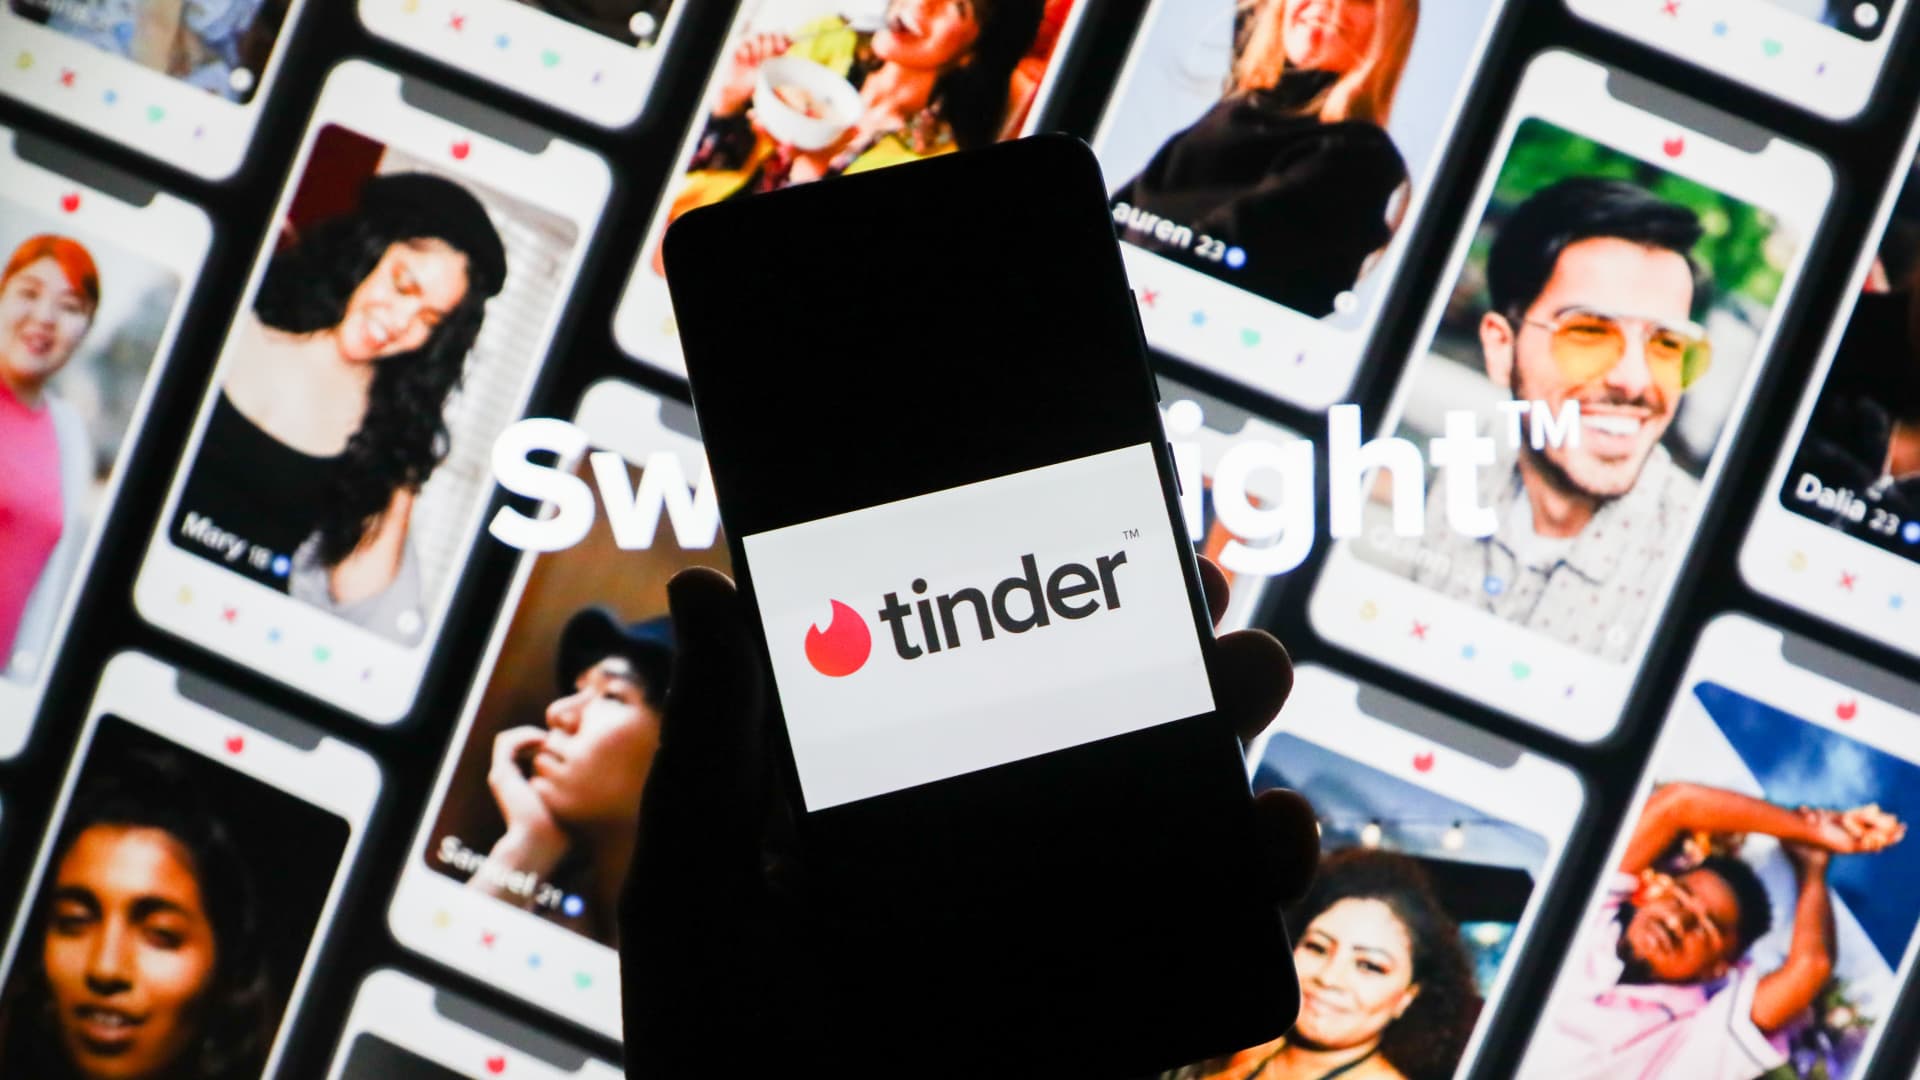 The Covid-19 pandemic resulted in an increase in people looking for love on dating platforms such as Match Group's Tinder app.